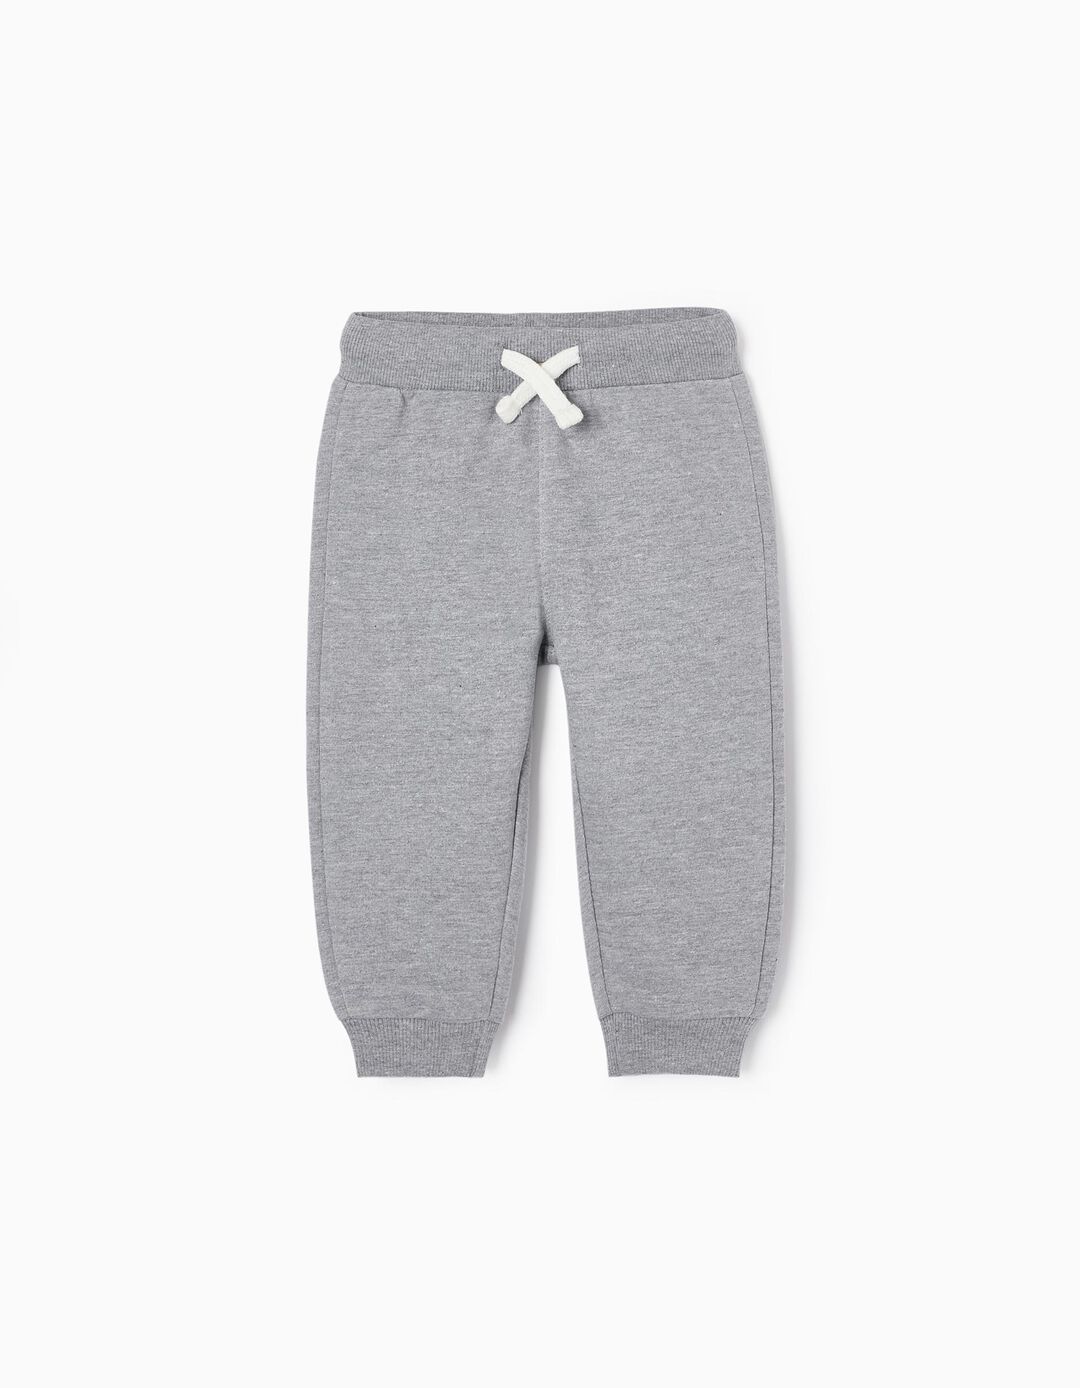 Cotton Joggers for Baby Boys, Grey